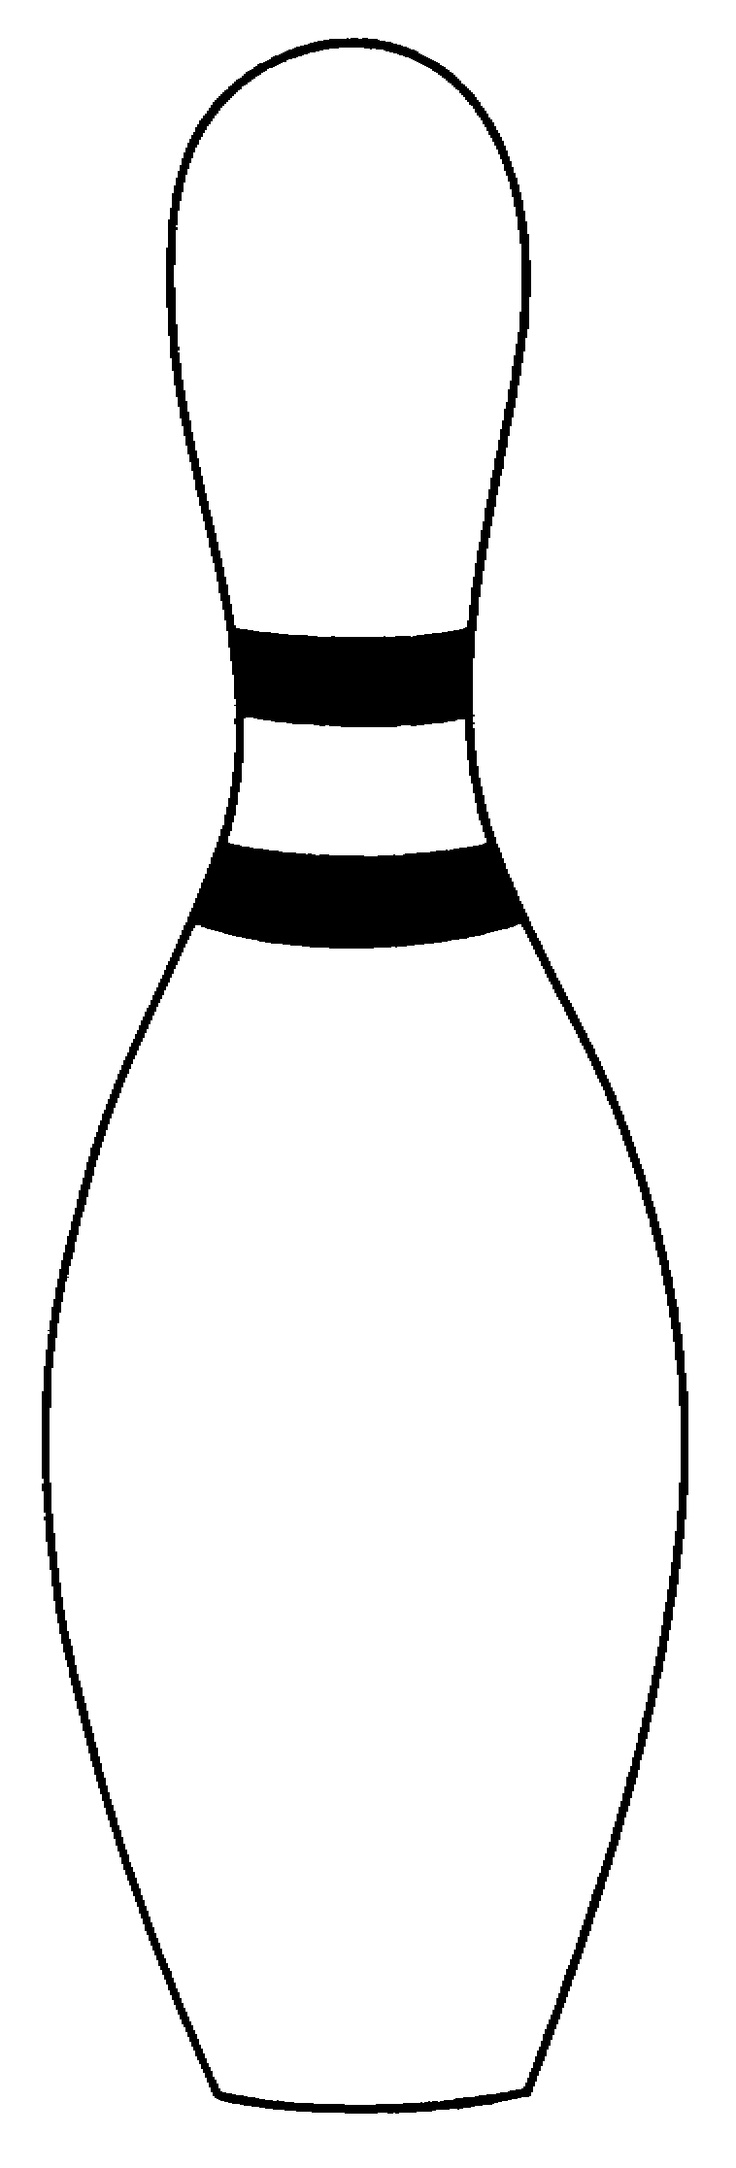 Free Bowling Pin Clipart, Download Free Clip Art, Free Clip Art on.